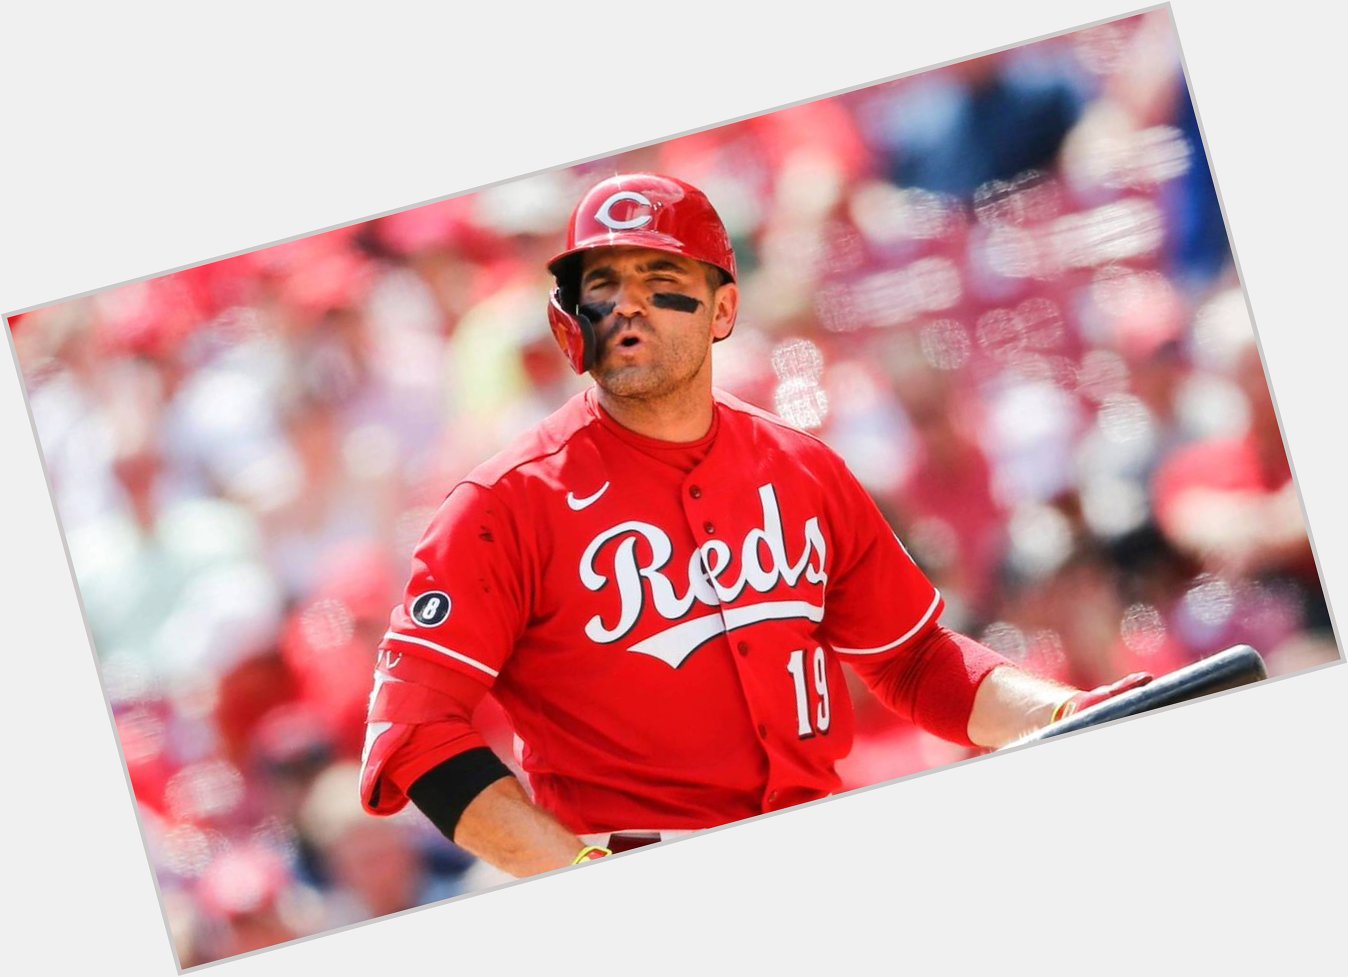 Happy birthday May Joey Votto get his 100th hit today and may he shout your name as he does it. 